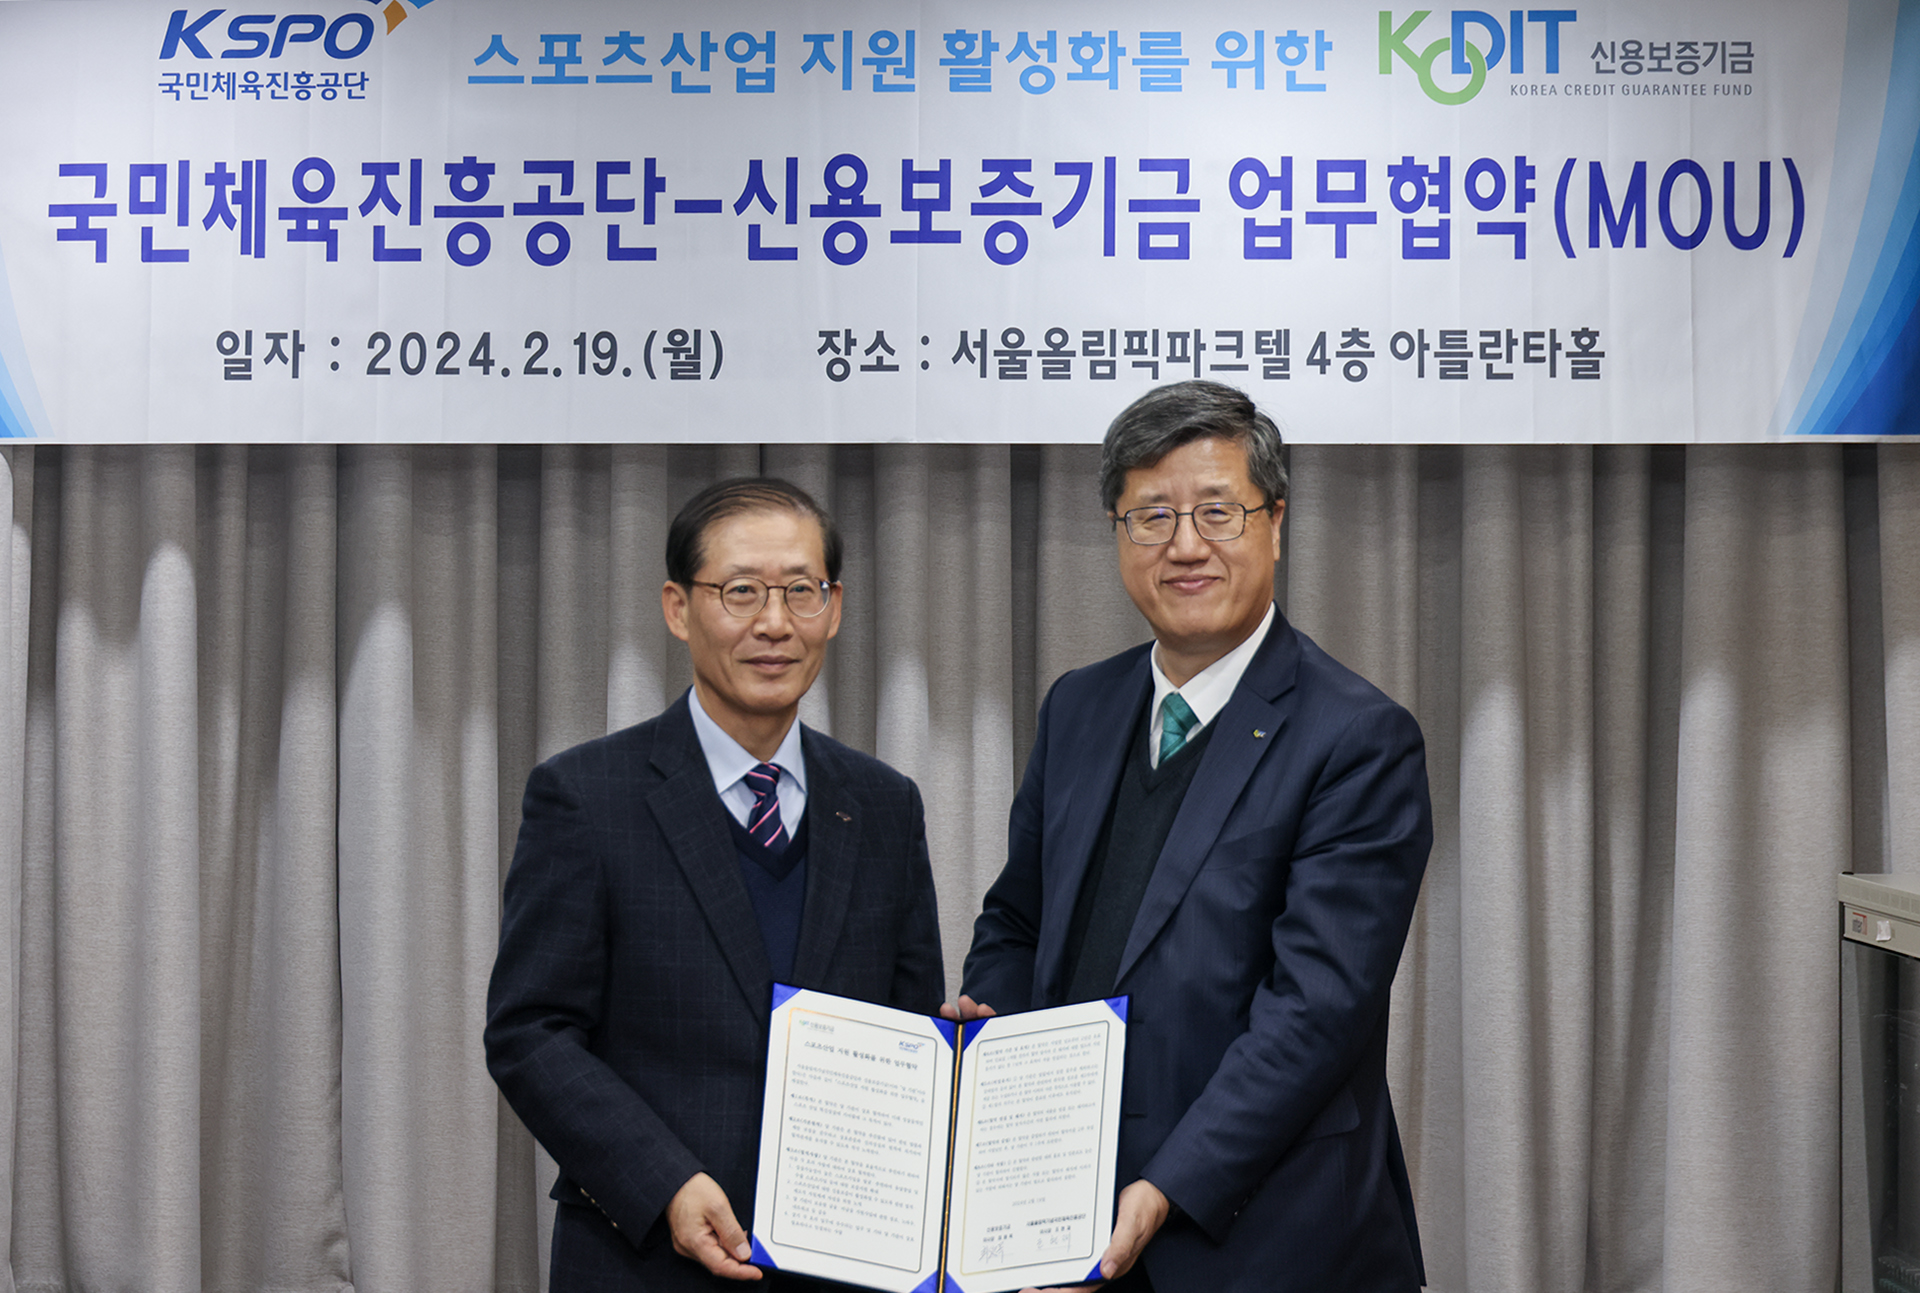 KODIT Signs an MOU on Promoting Sports Industry with Korea Sports promotion Foundation (February 20, 2024)